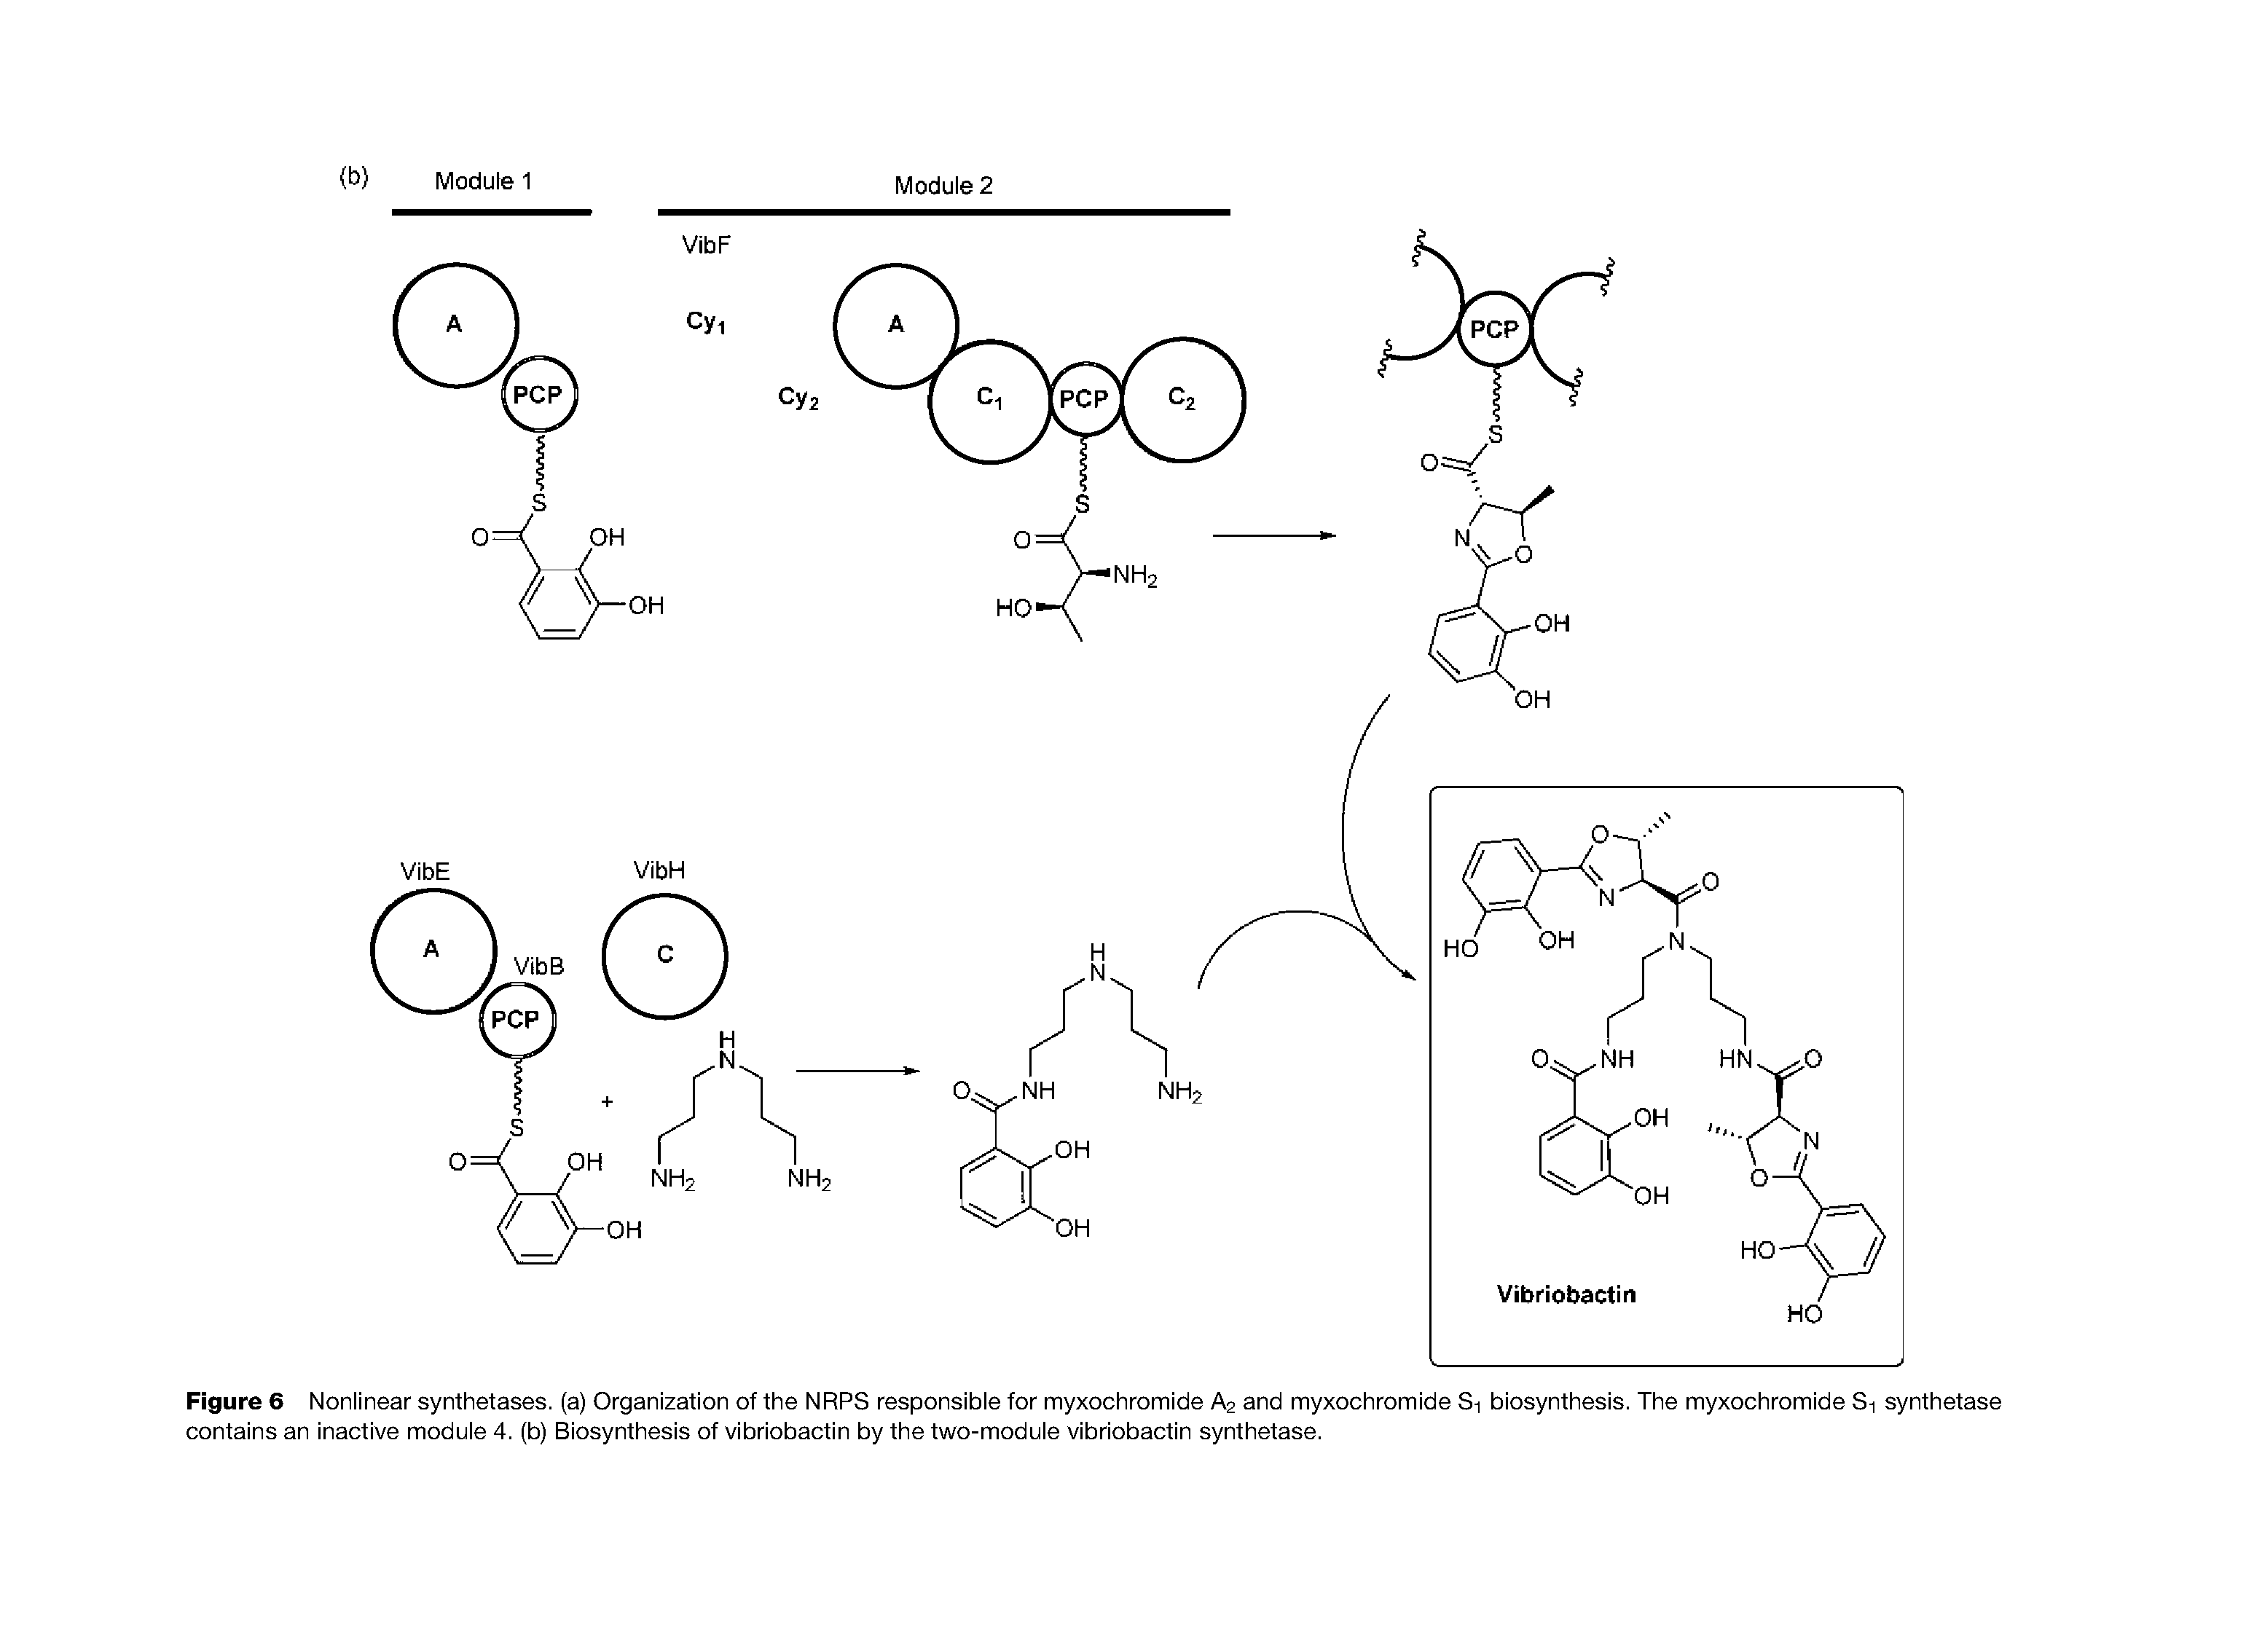 Figure 6 Nonlinear synthetases, (a) Organization of the NRPS responsible for myxochromide A2 and myxochromide Si biosynthesis. The myxochromide Si synthetase contains an inactive module 4. (b) Biosynthesis of vibriobactin by the two-module vibriobactin synthetase.